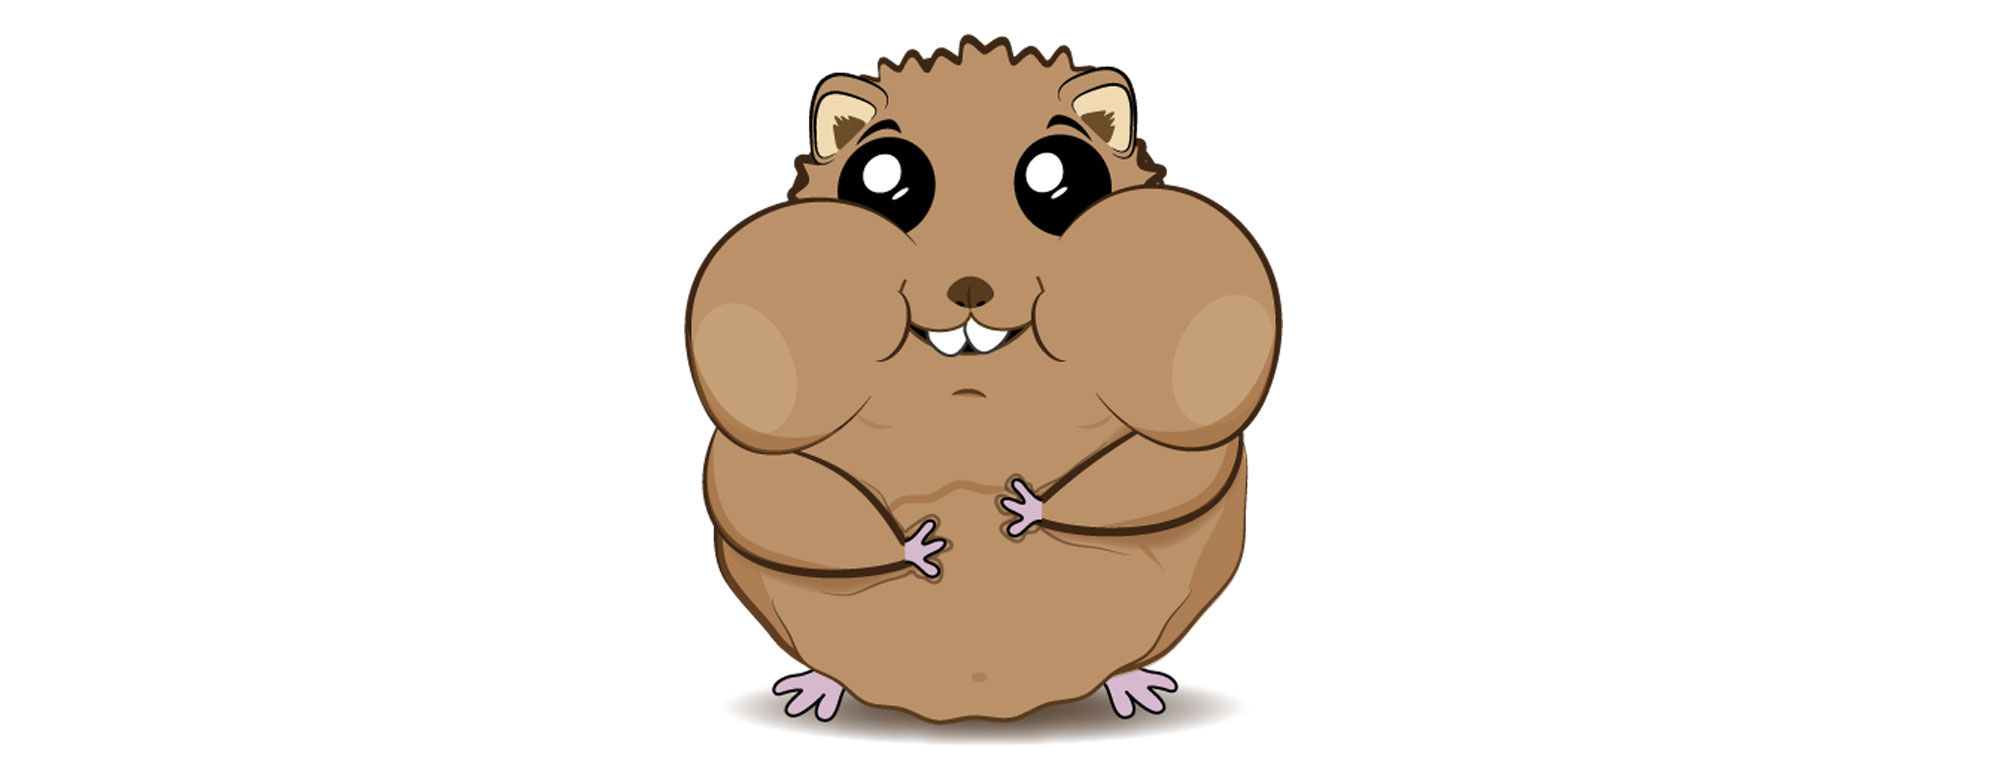 Hamster illustration with cartoon style, as main character to videogame  Hamsty Crafty